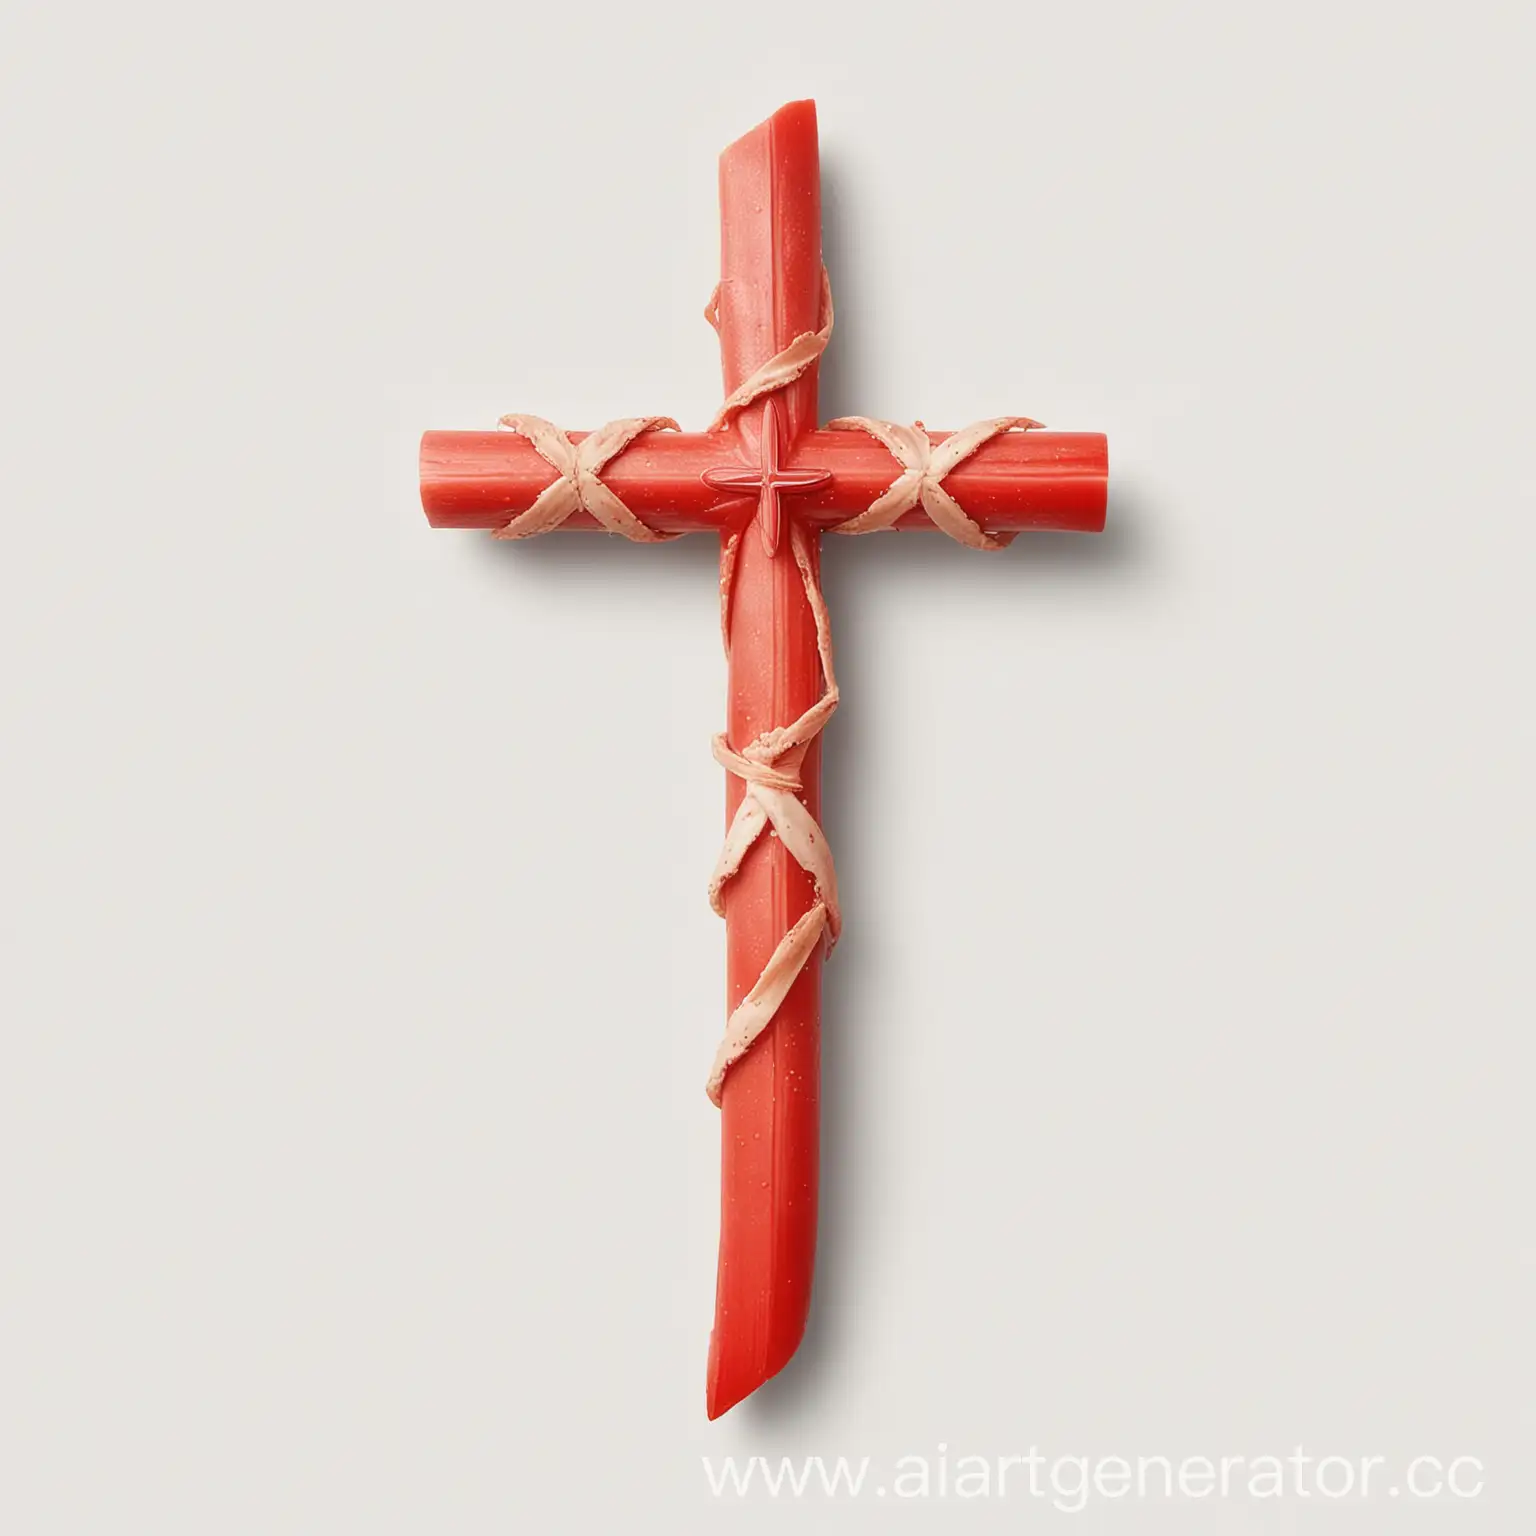 Realistic-Christian-Crab-Stick-Cross-on-White-Background